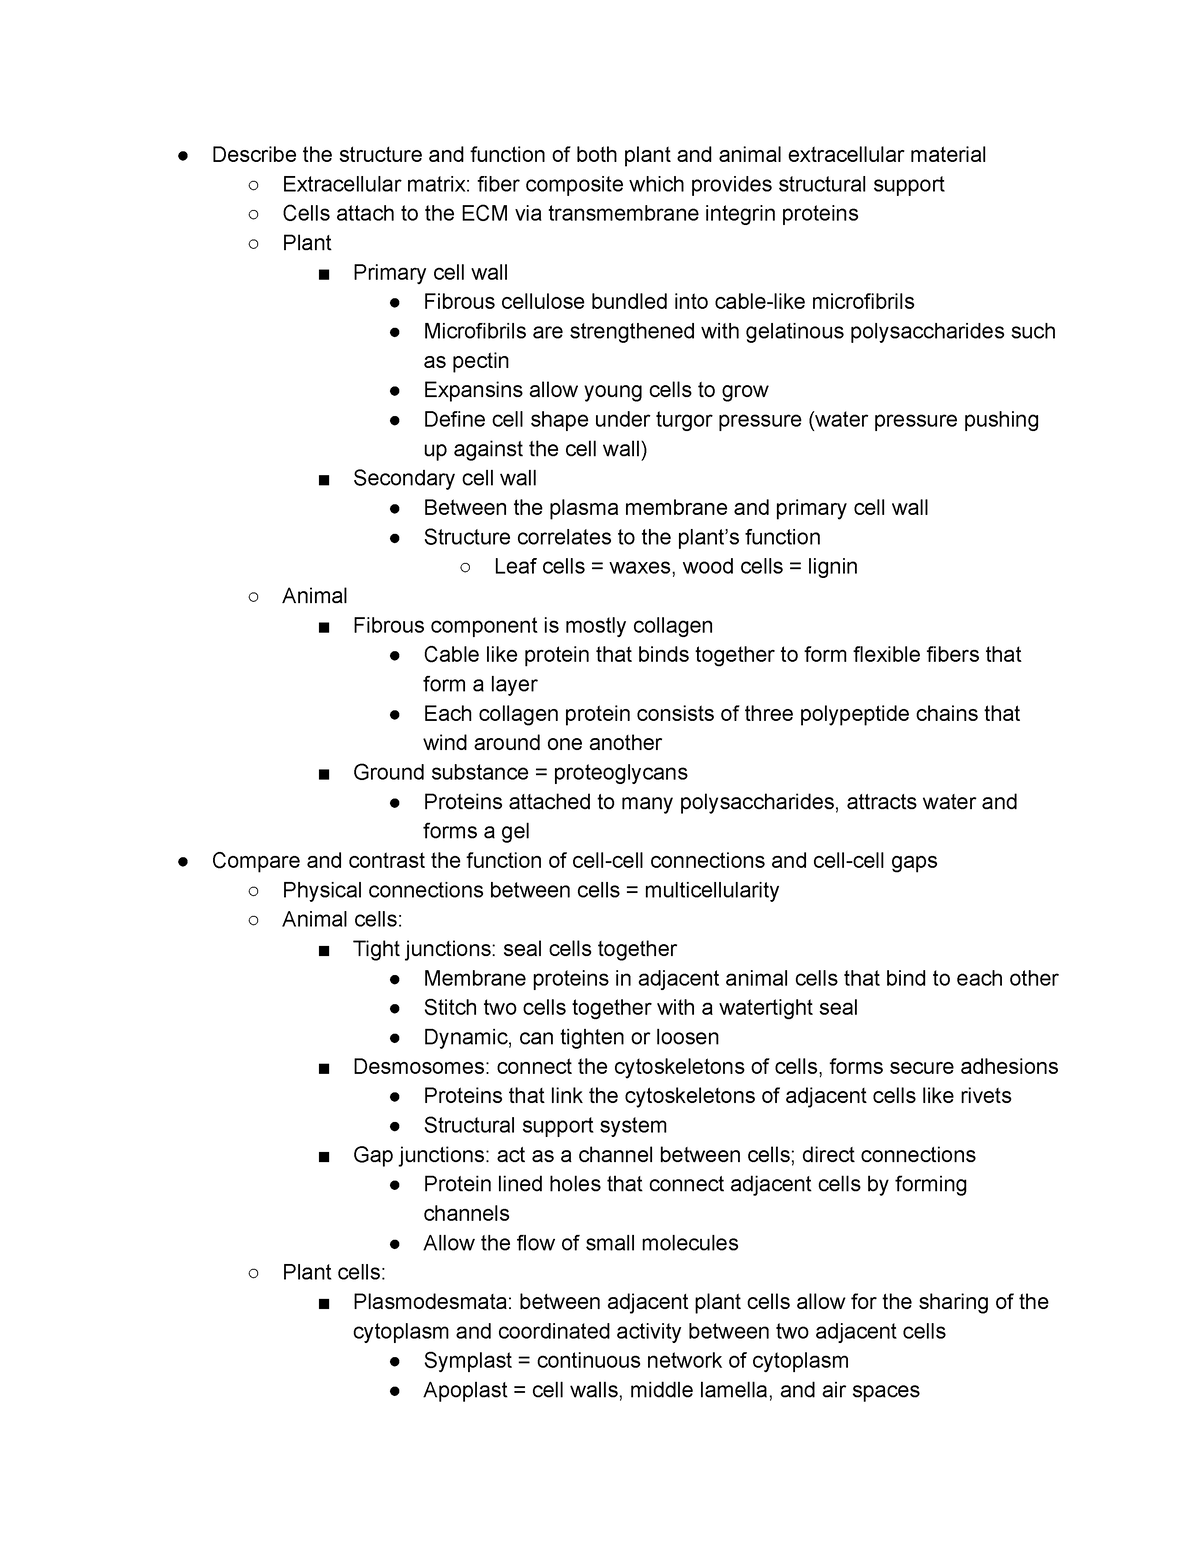 Biology Unit 3 Study Guide - Describe the structure and function of ...